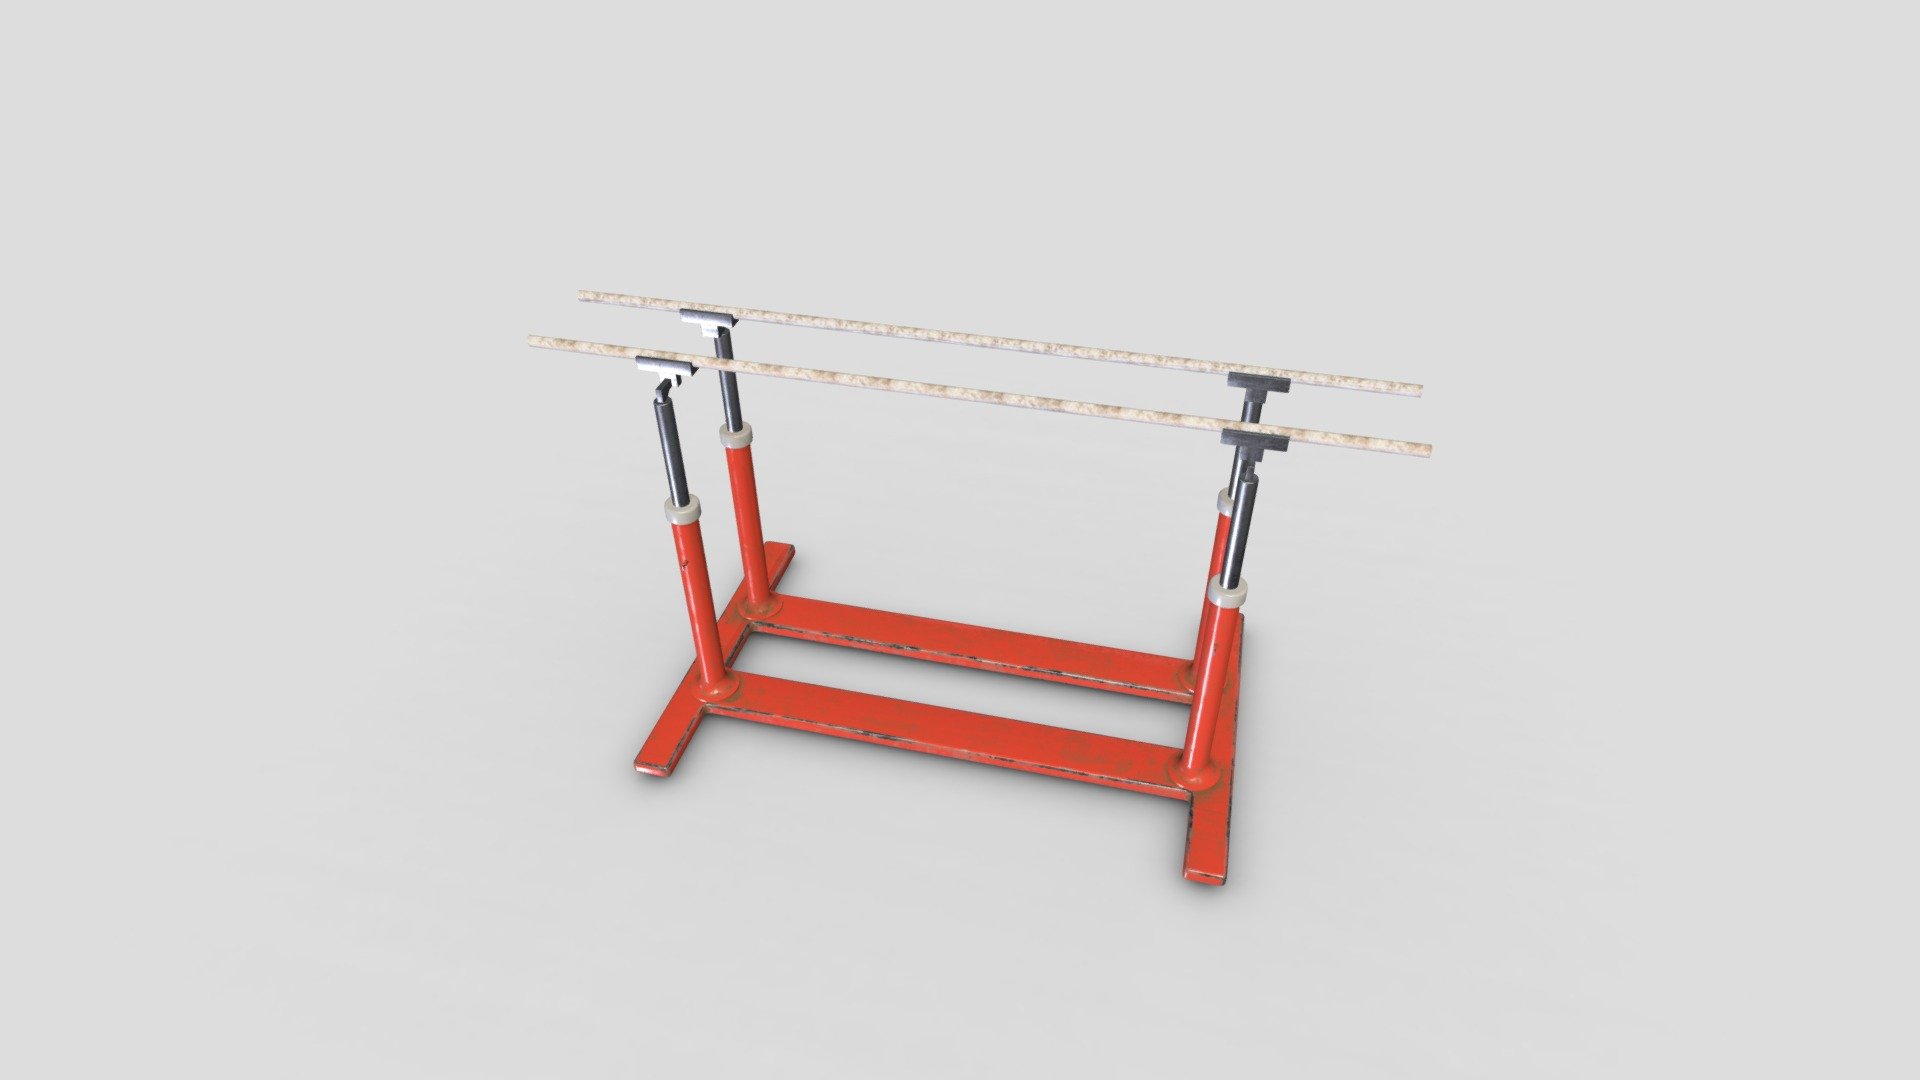 Parallel gymnastics device with real and accurate standard dimensions. You can download for free just support us with a like
New library to help artists
https://library-darts.blogspot.com/ - Gymnastics Parallel Apparatus - Download Free 3D model by Ashraf Digital Arts 3D (@ashrafarts) 3d model